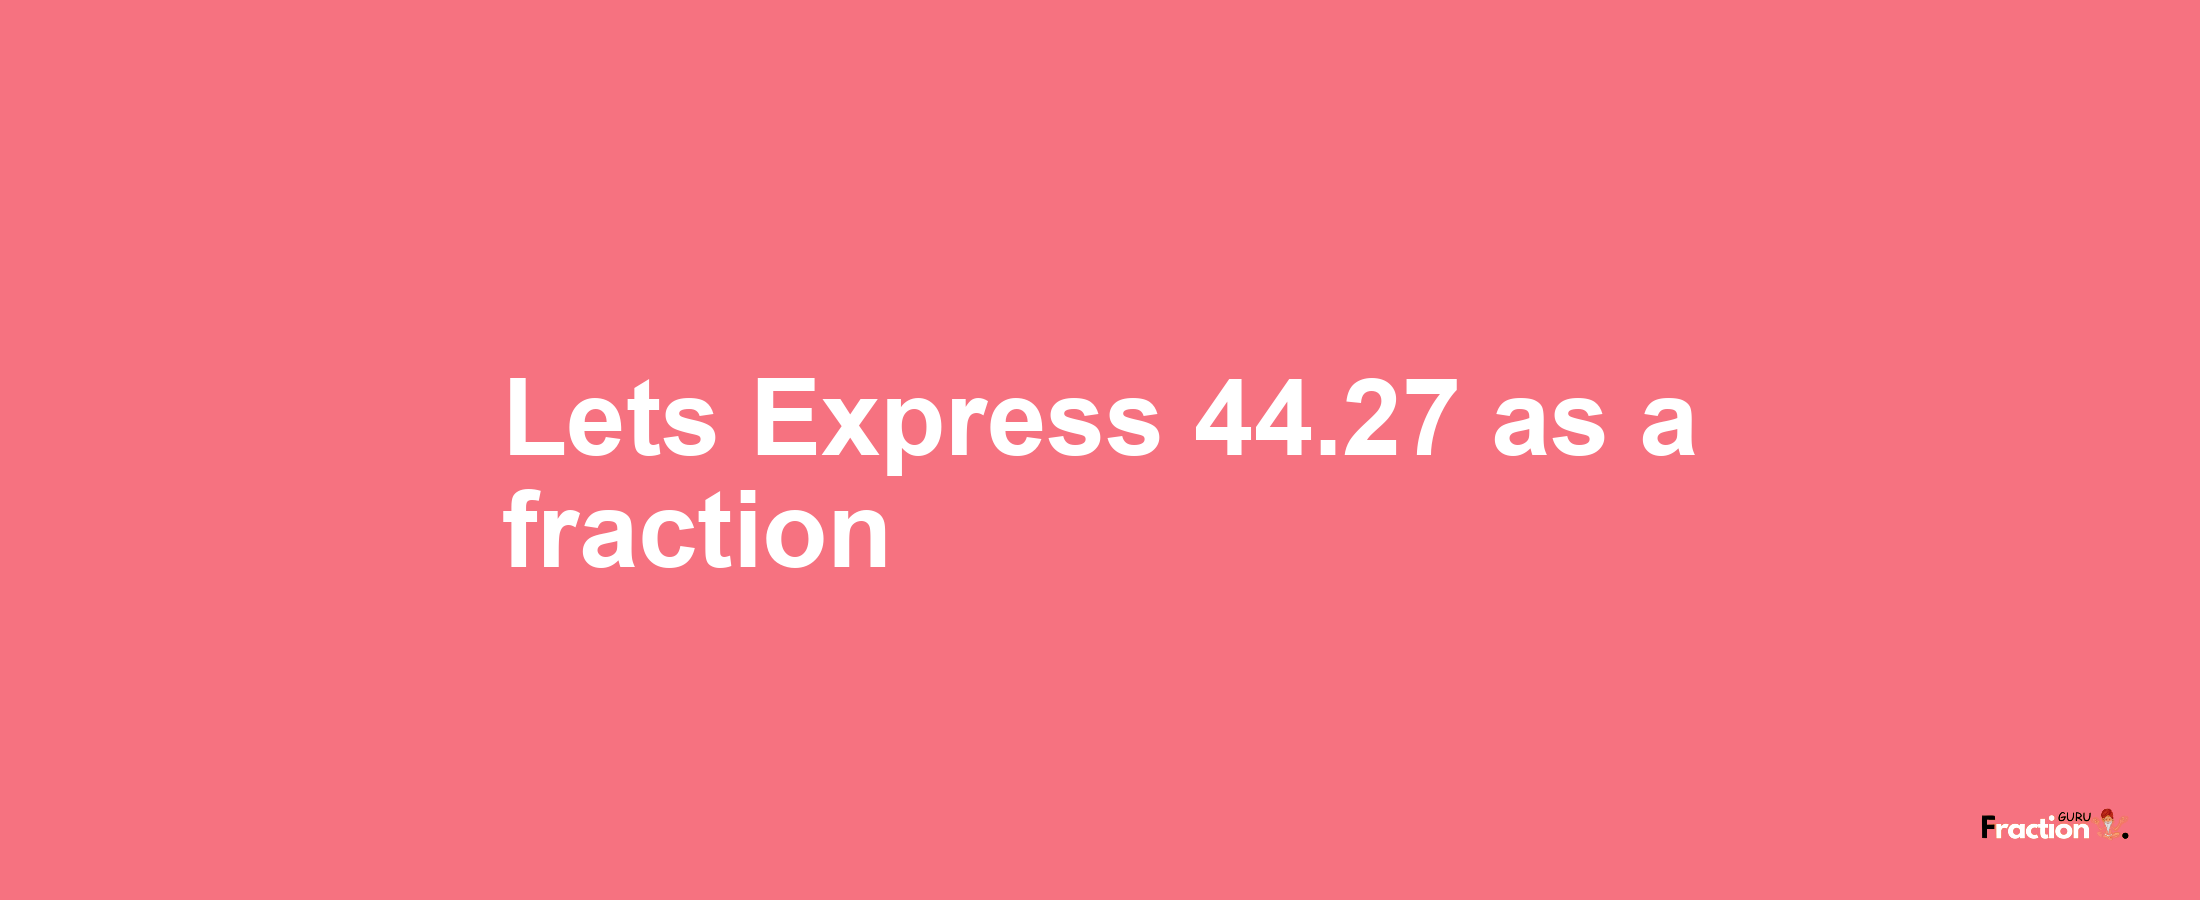 Lets Express 44.27 as afraction